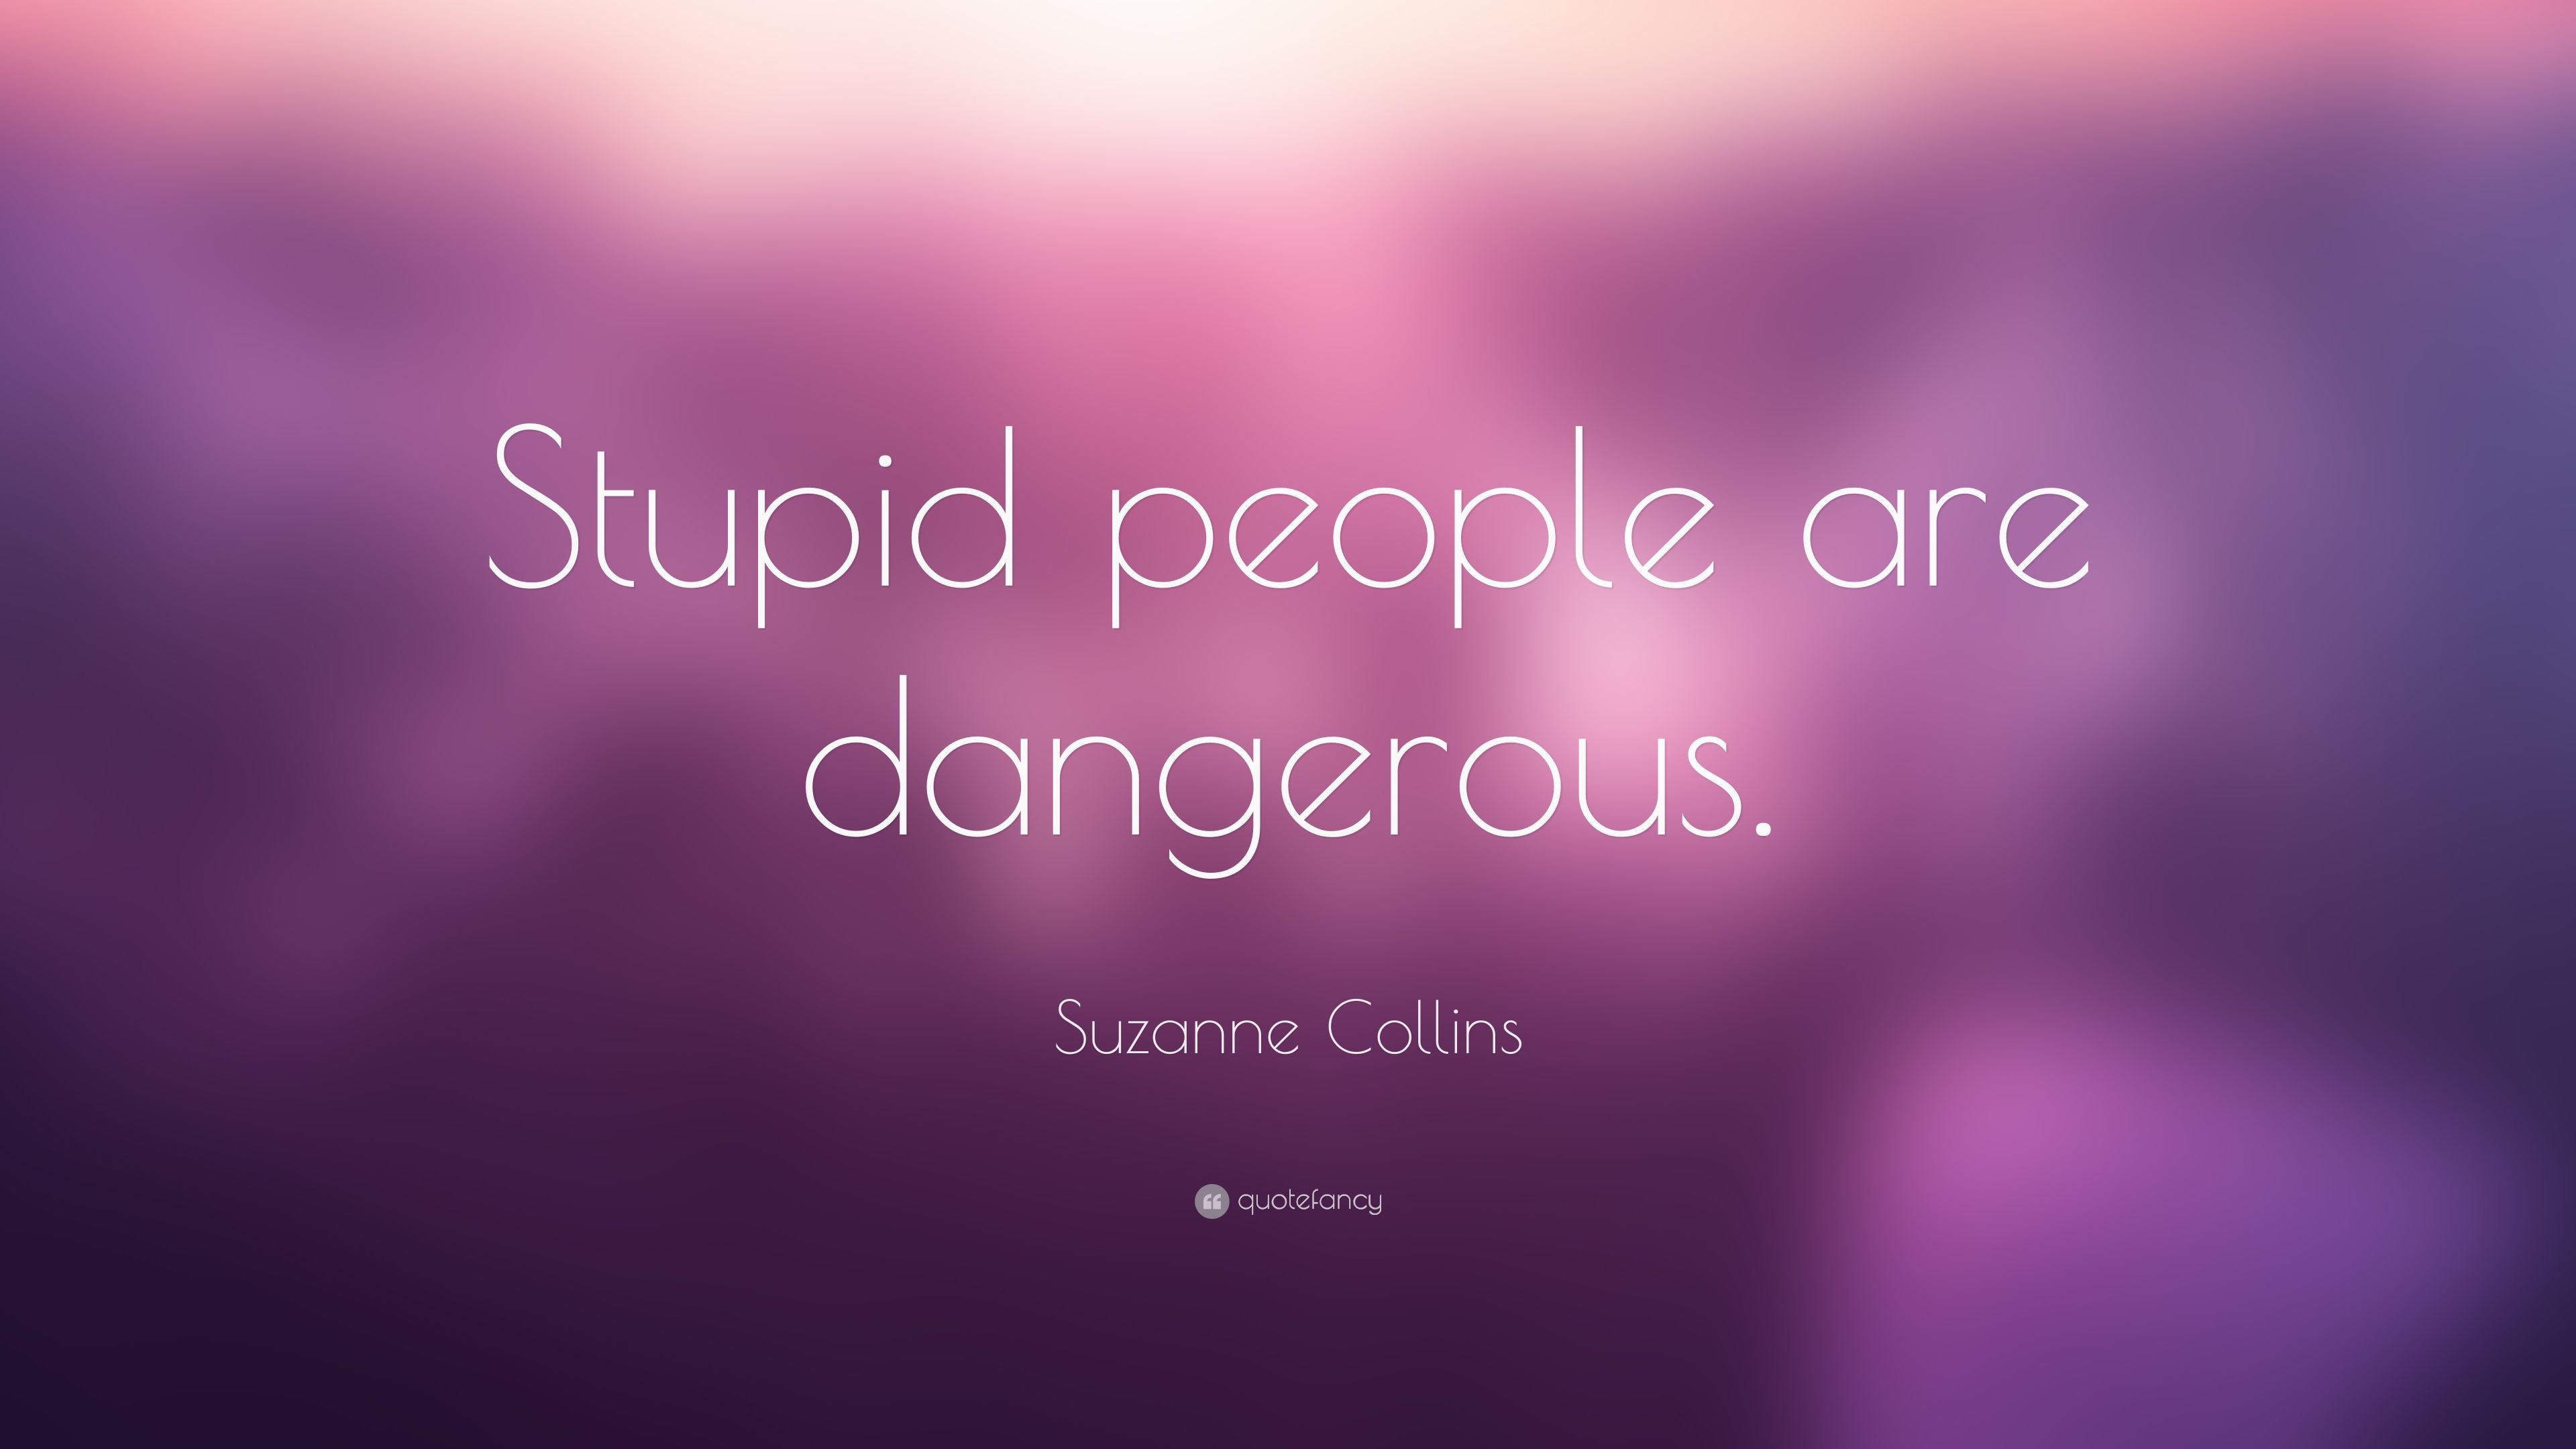 Suzanne Collins Quote: “Stupid people are dangerous.” (6 wallpaper)